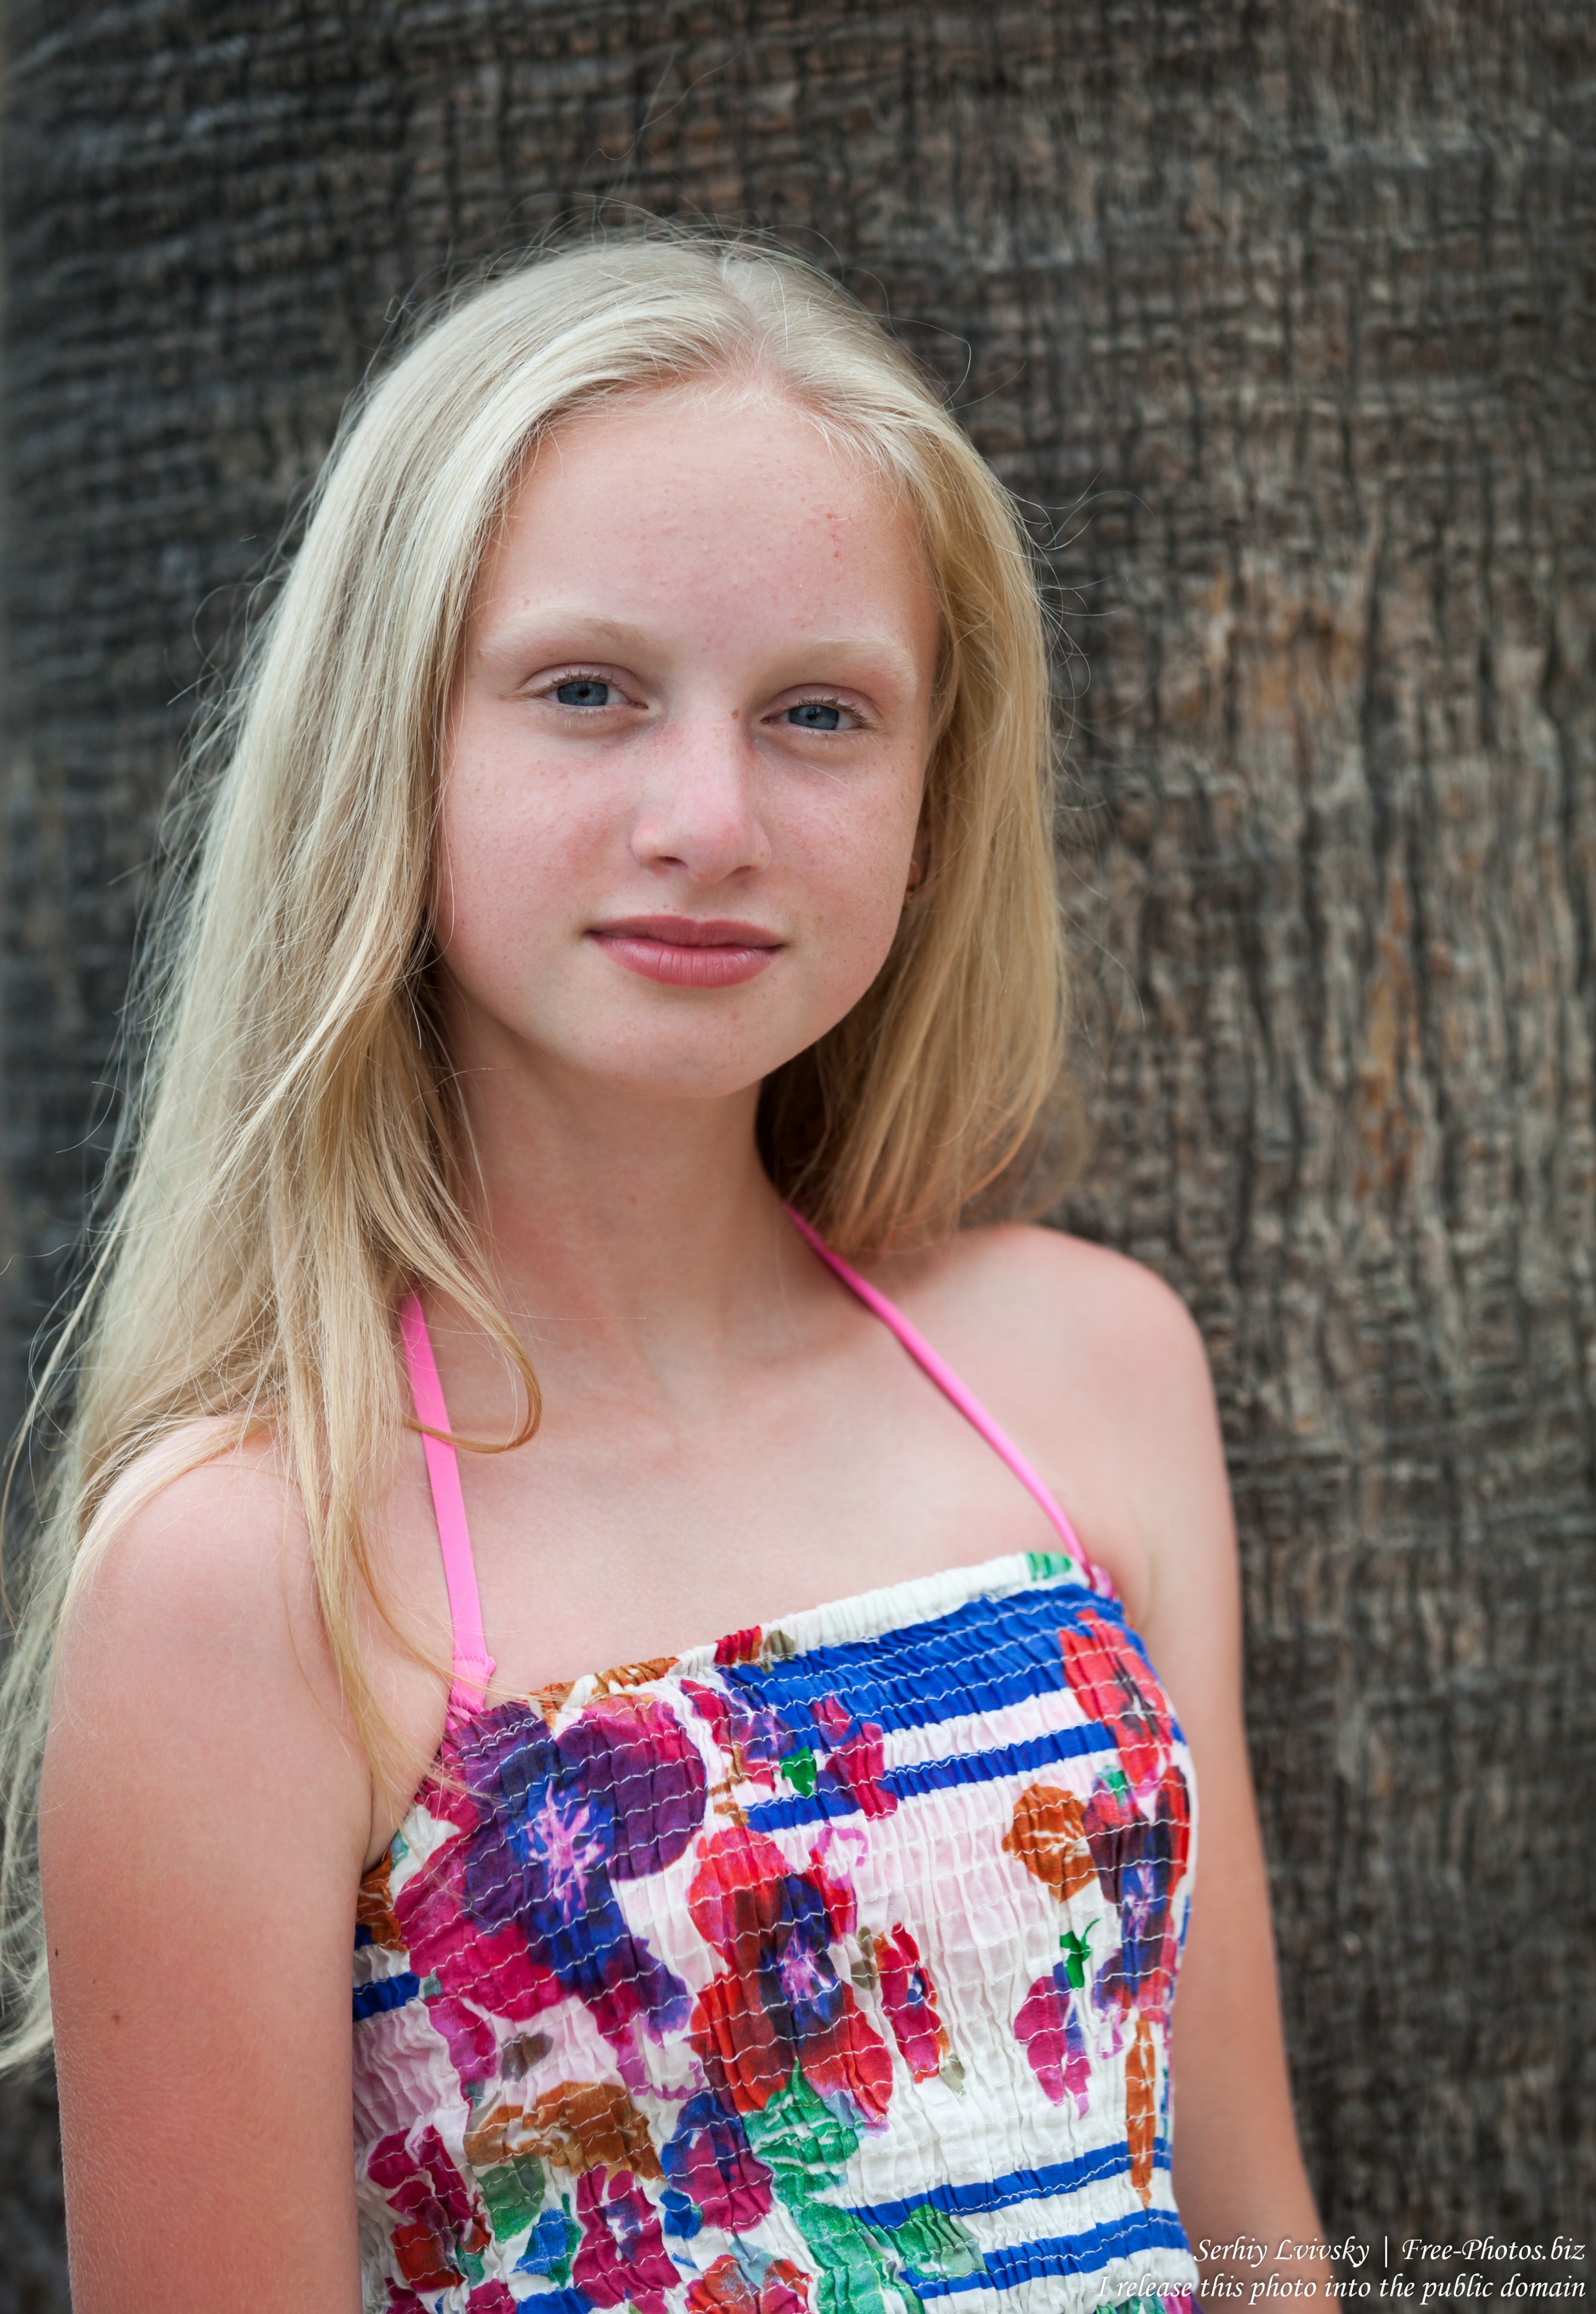 Photo Of Bozena An 11 Year Old Natural Blonde Catholic Girl Photographed By Serhiy Lvivsky In 